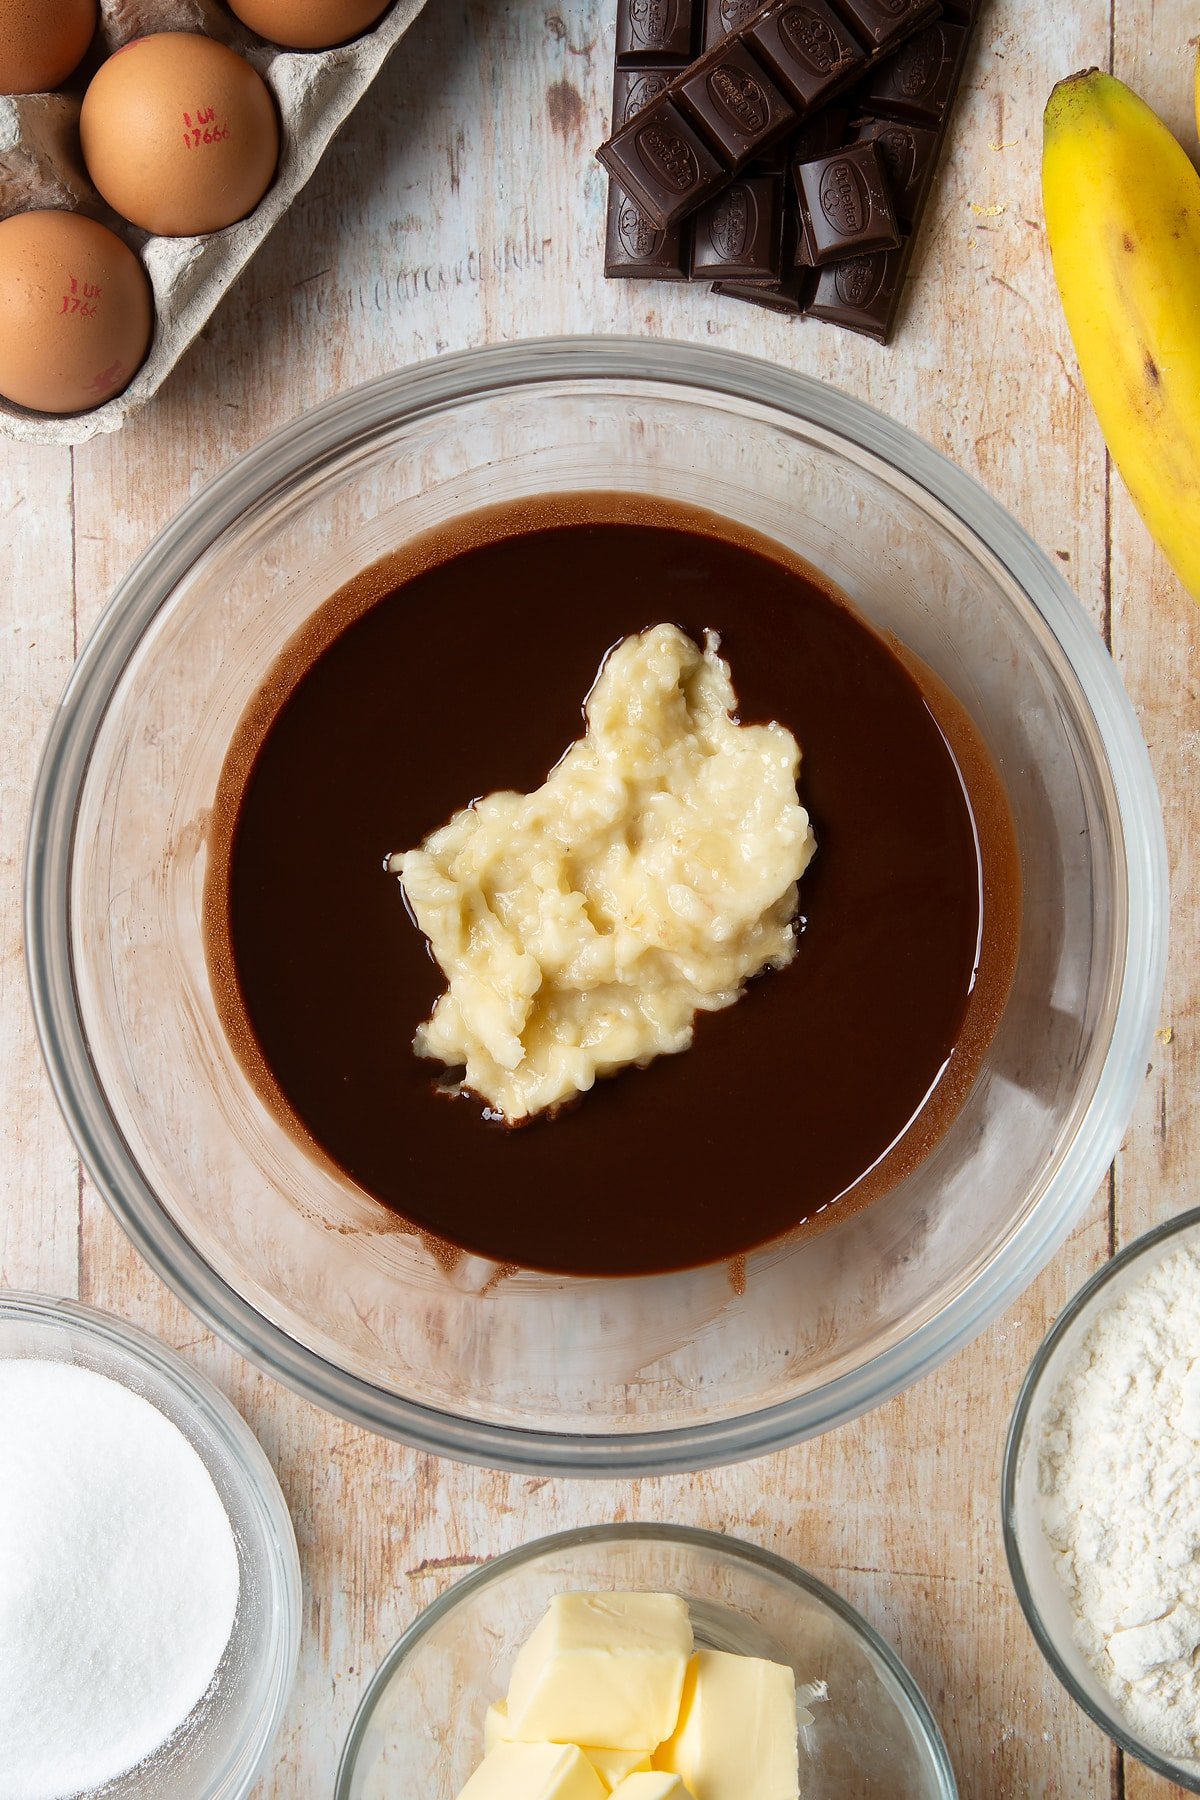 Overhead shot of chocolate mix and mashed bananas in a large clear bowl